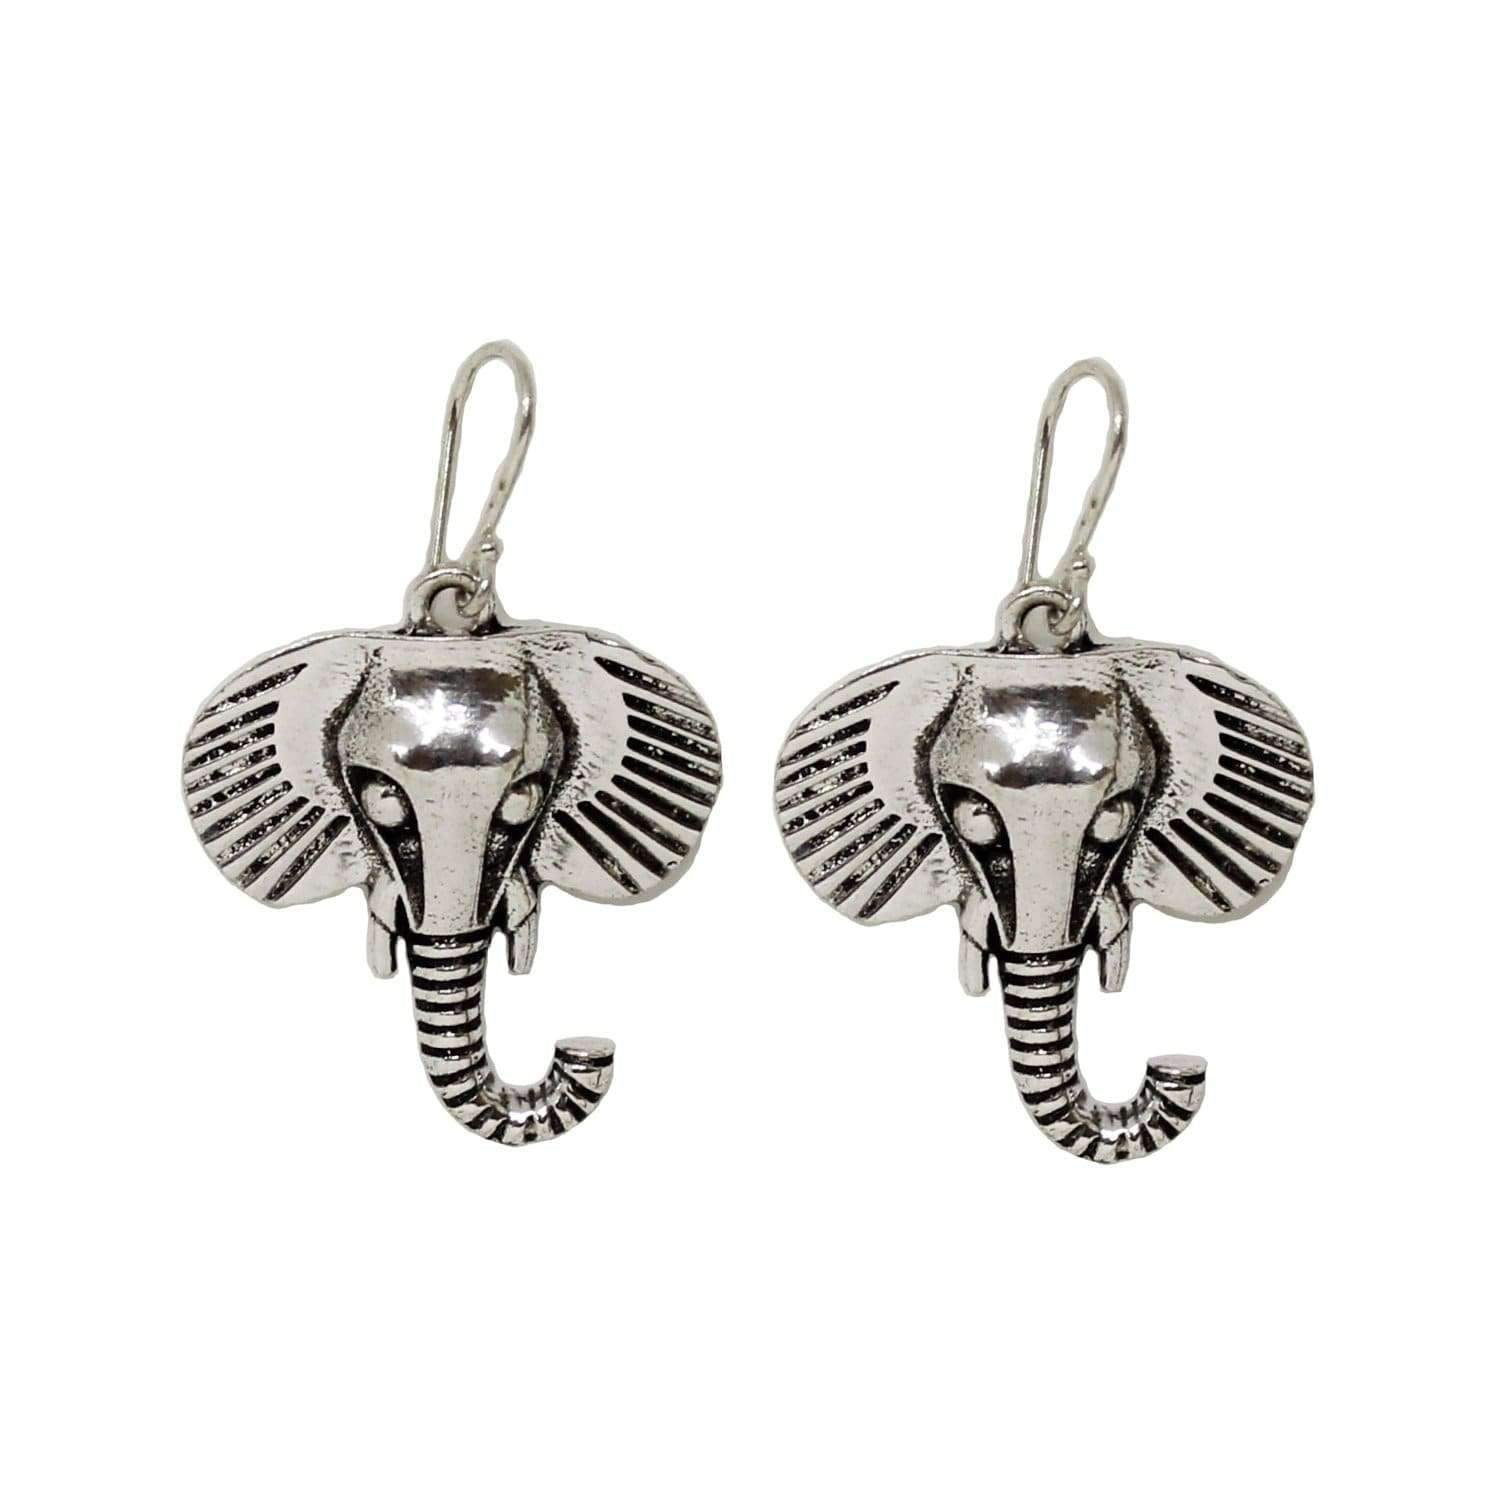 Indian Style Brass Elephant Earrings - Hypoallergenic and Nickel-Free Jewelry for Animal Lovers - Jewelry & Watches - Bijou Her -  -  - 